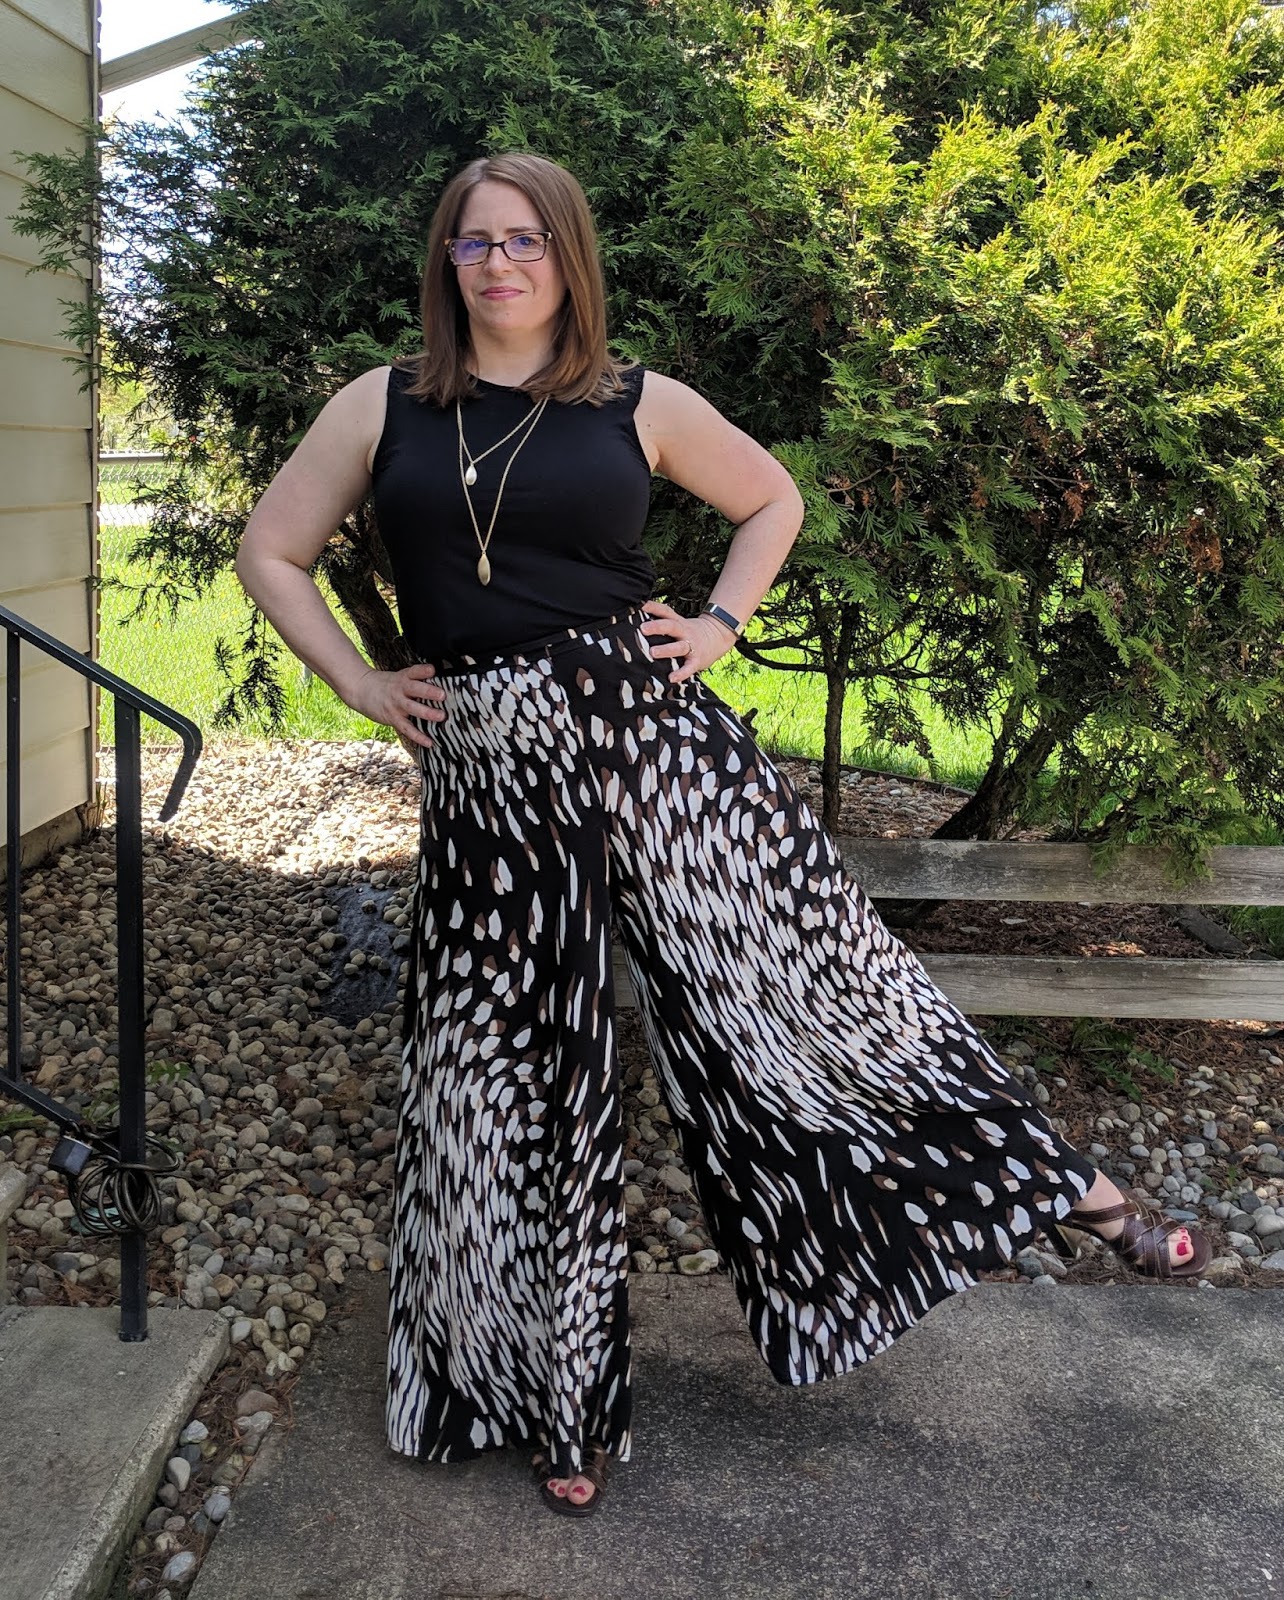 Samara Pants From Itch to Stitch: The Fun Of Something New